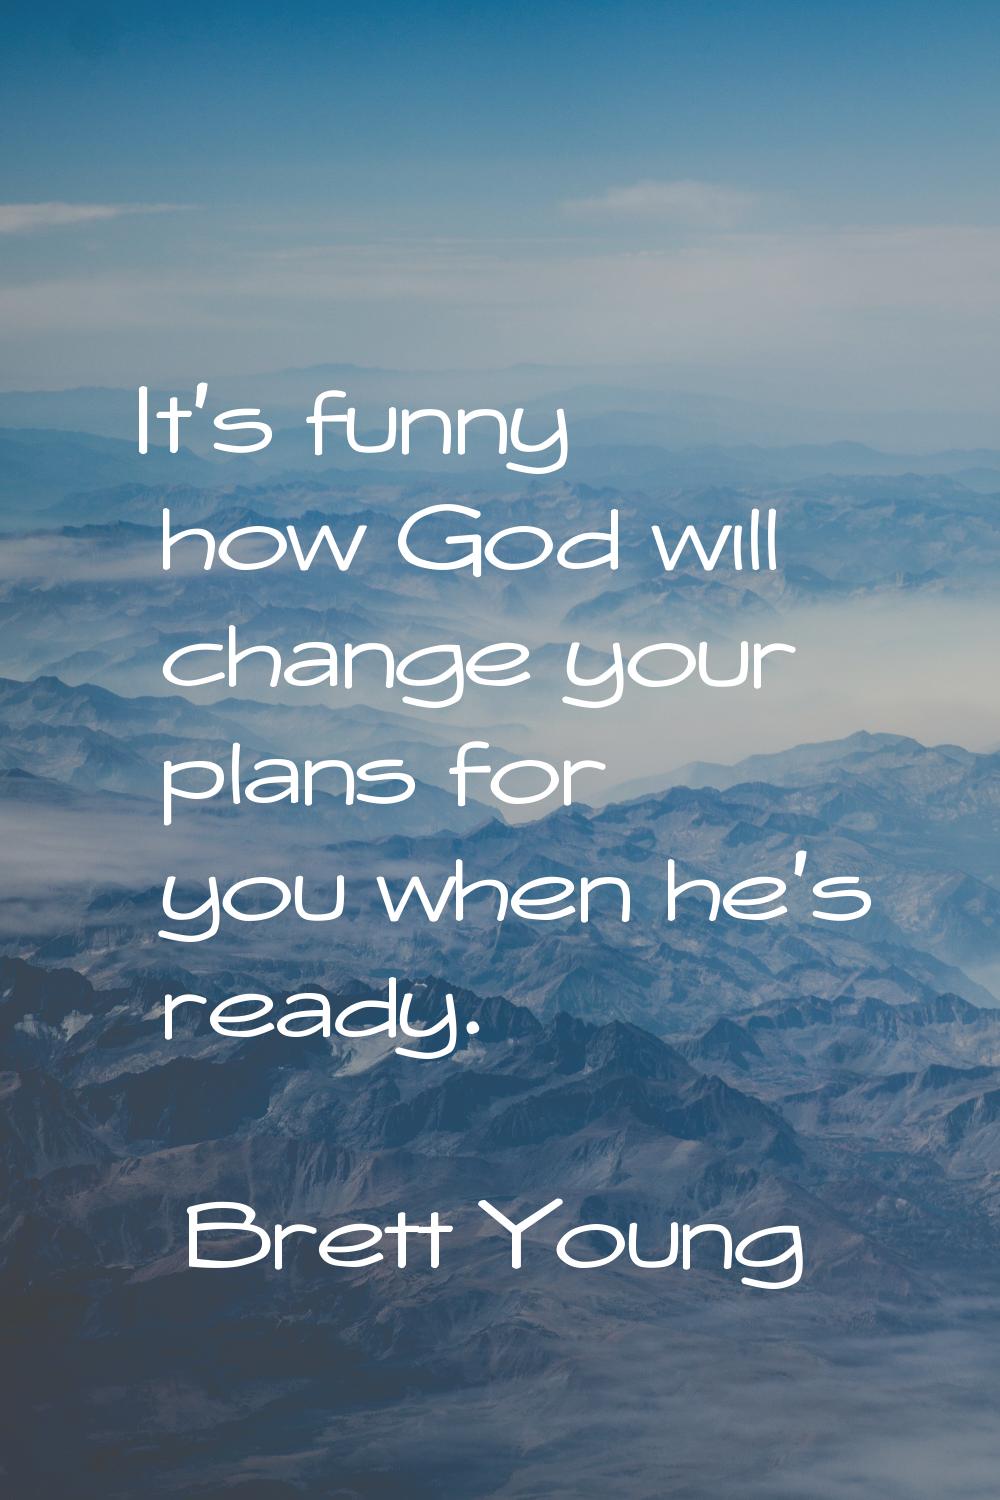 It's funny how God will change your plans for you when he's ready.